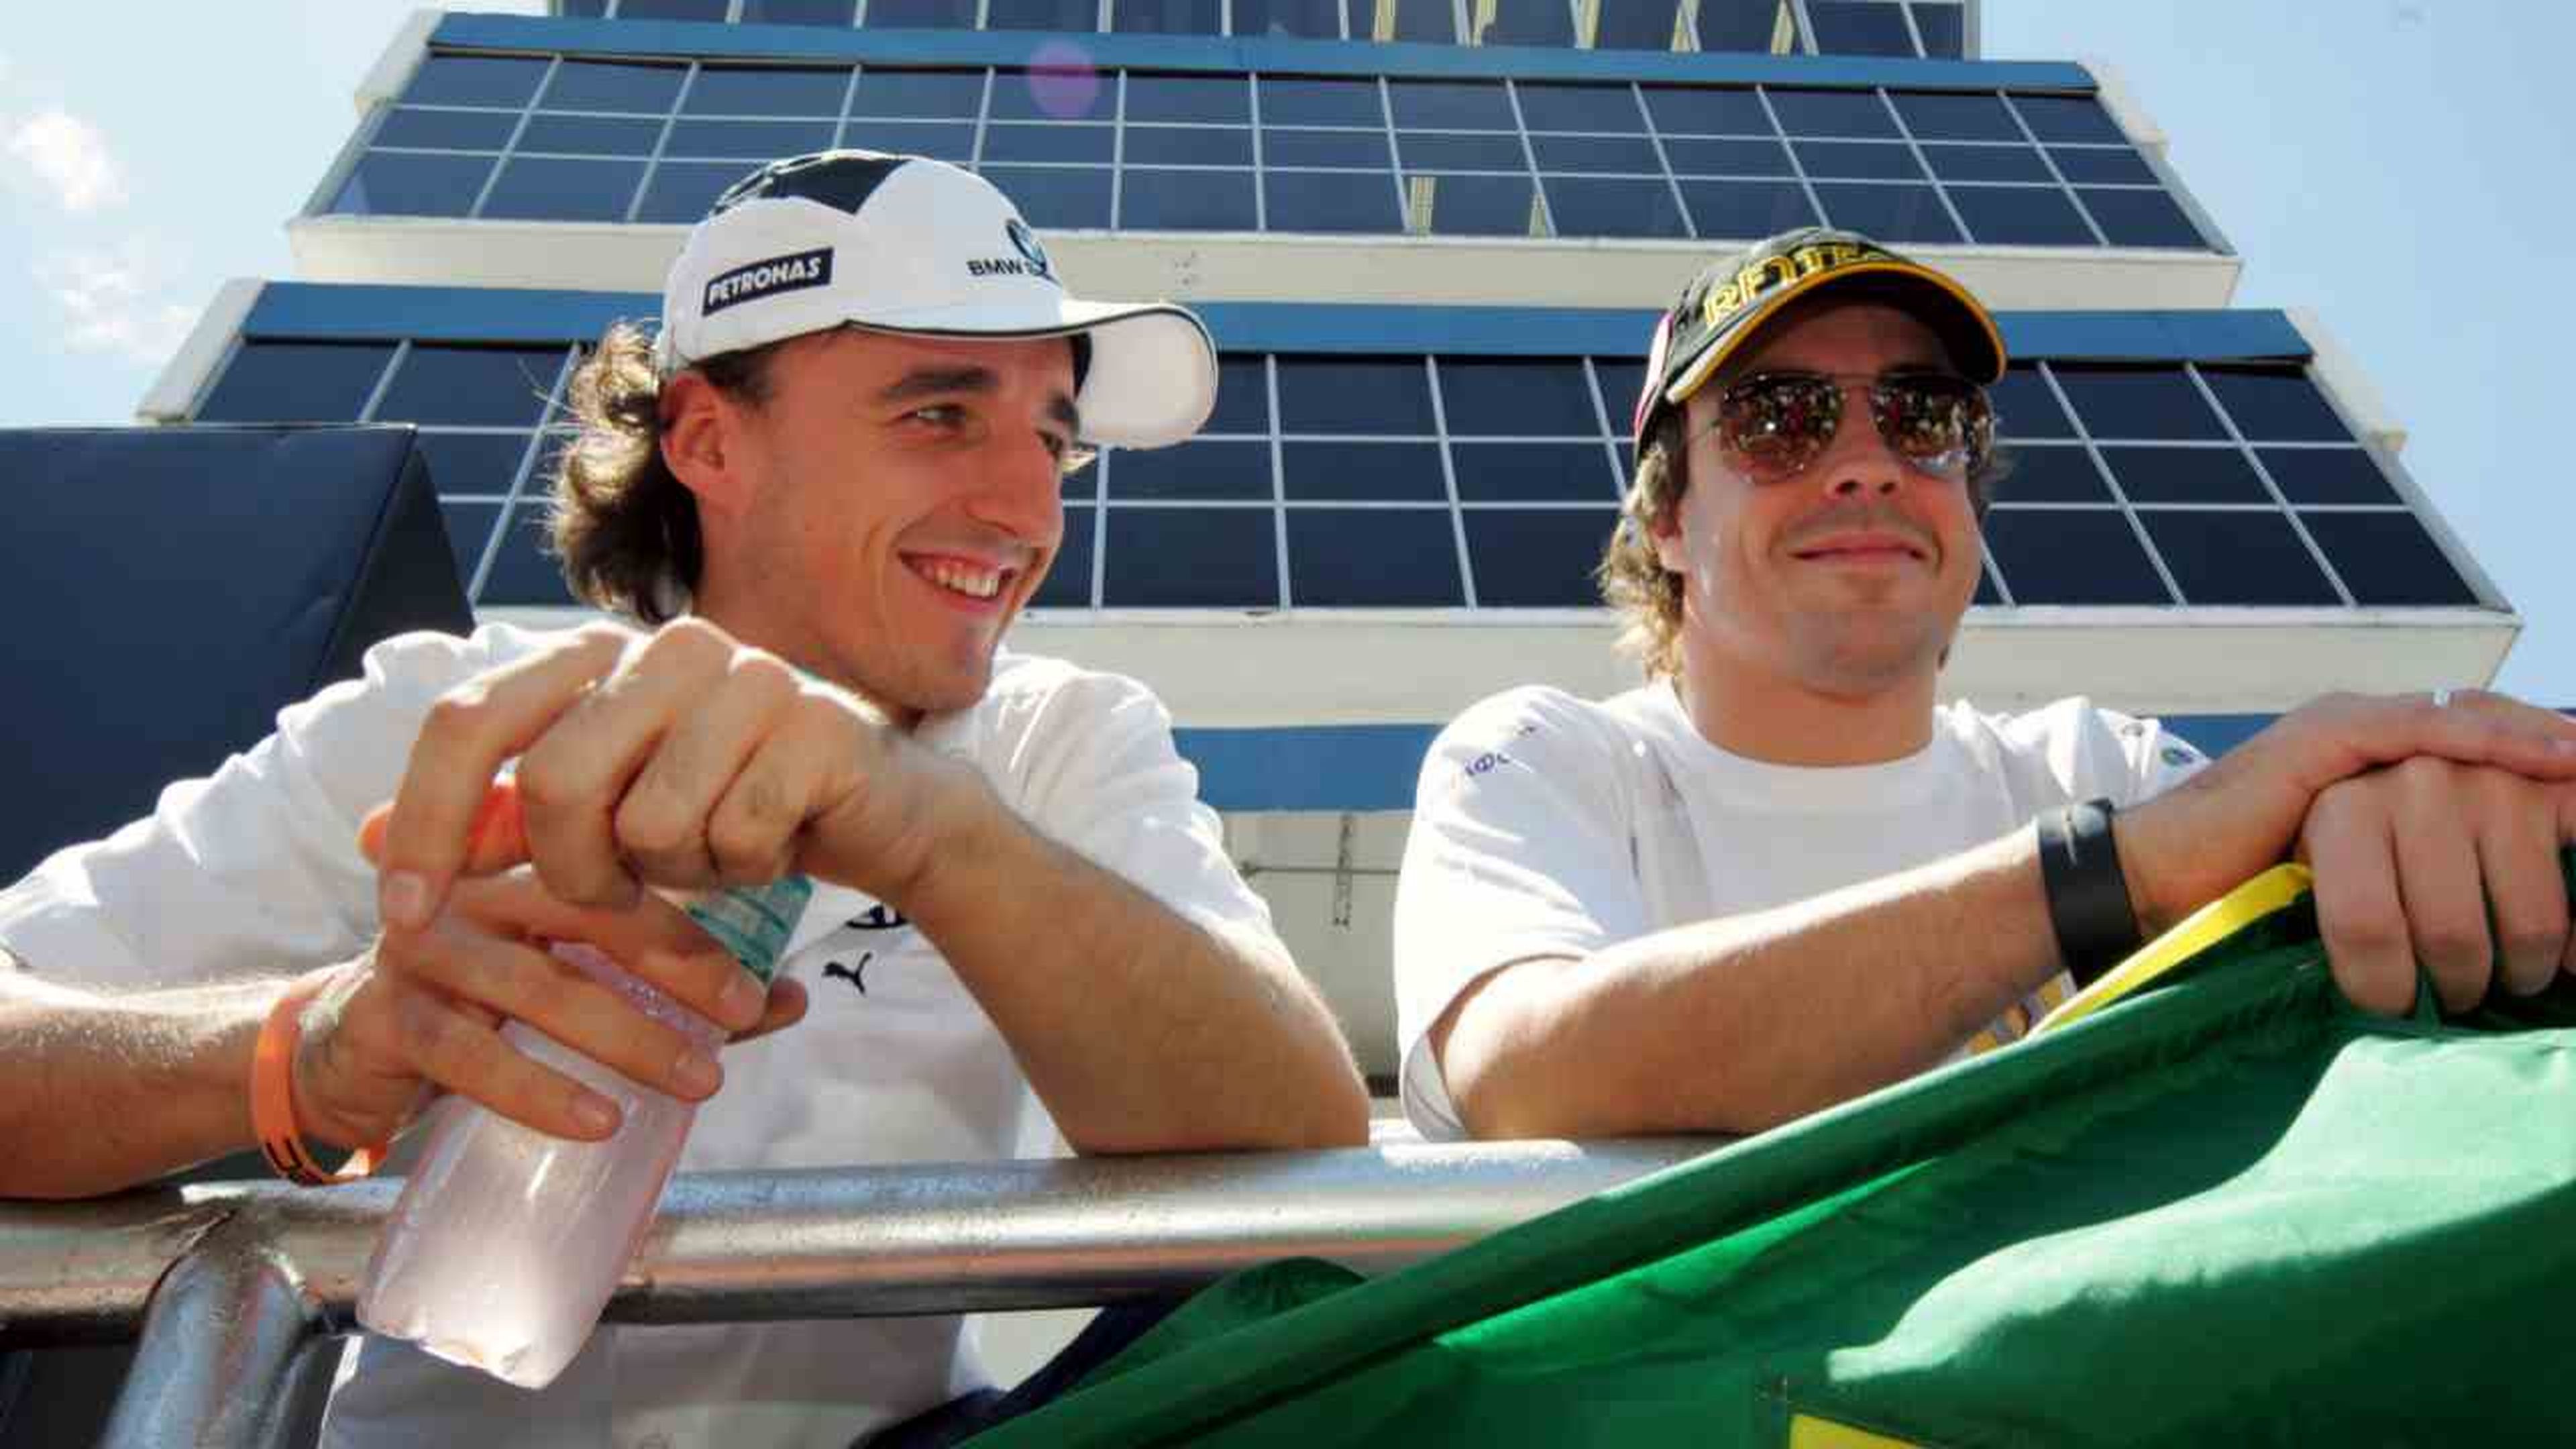 Alonso y Kubica